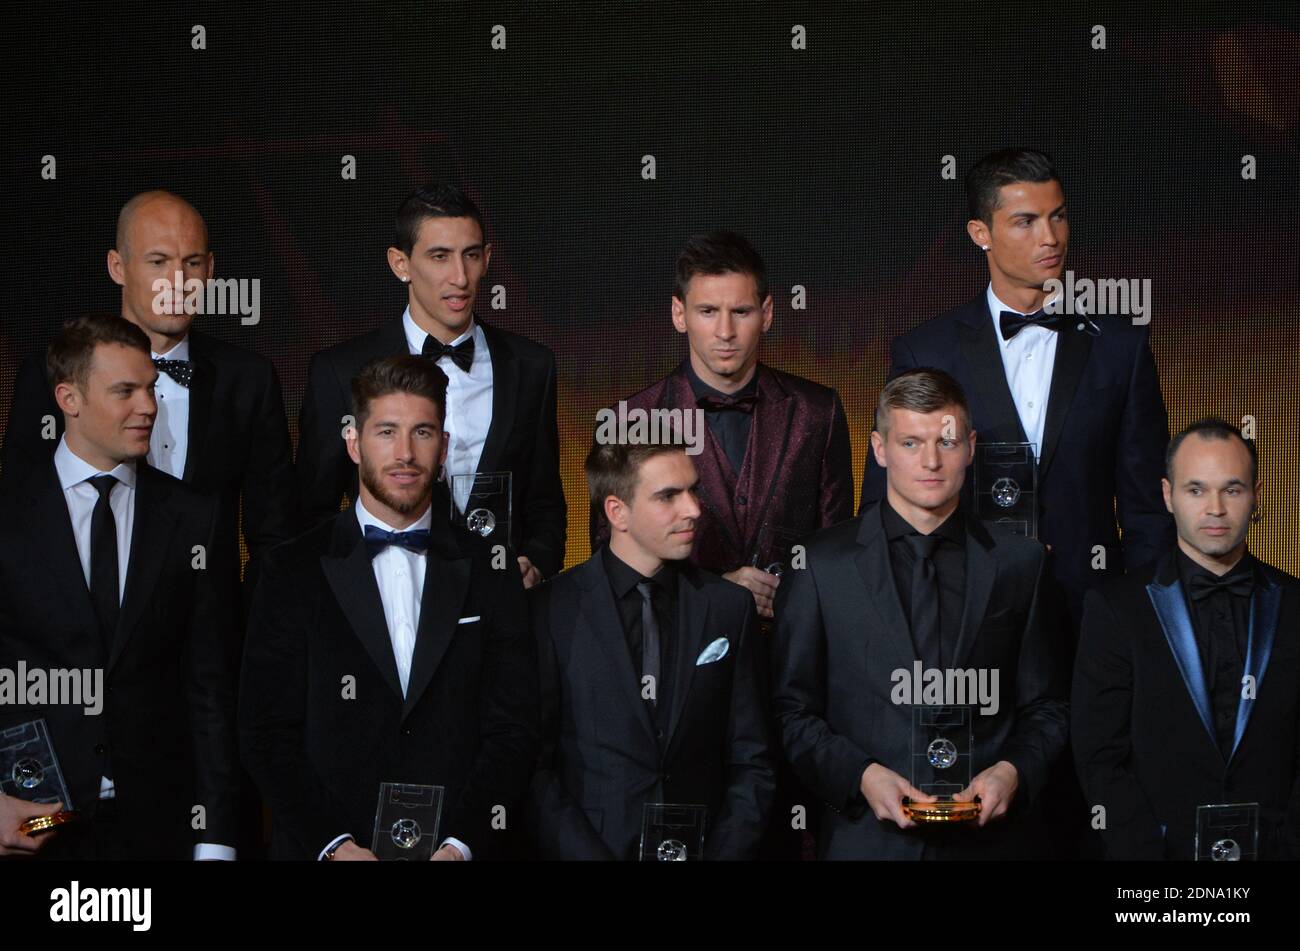 (Top - from L) Bayern Munich and Netherlands forward Arjen Robben, Manchester United and Argentina midfielder Angel Di Maria, Barcelona and Argentina forward Lionel Messi, Real Madrid and Portugal forward Cristiano Ronaldo (bottom - from L) Bayern Munich and Germany goalkeeper Manuel Neuer, Real Madrid and Spain defender Sergio Ramos, Bayern Munich and Germany defender Philipp Lahm, Real Madrid and Germany midfielder Toni Kroos, and Barcelona and Spain midfielder Andres Iniesta during the FIFA Ballon D’Or 2014 Award Gala at the Kongresshalle in Zurich, Switzerland on January 12, 2015. Photo by Stock Photo